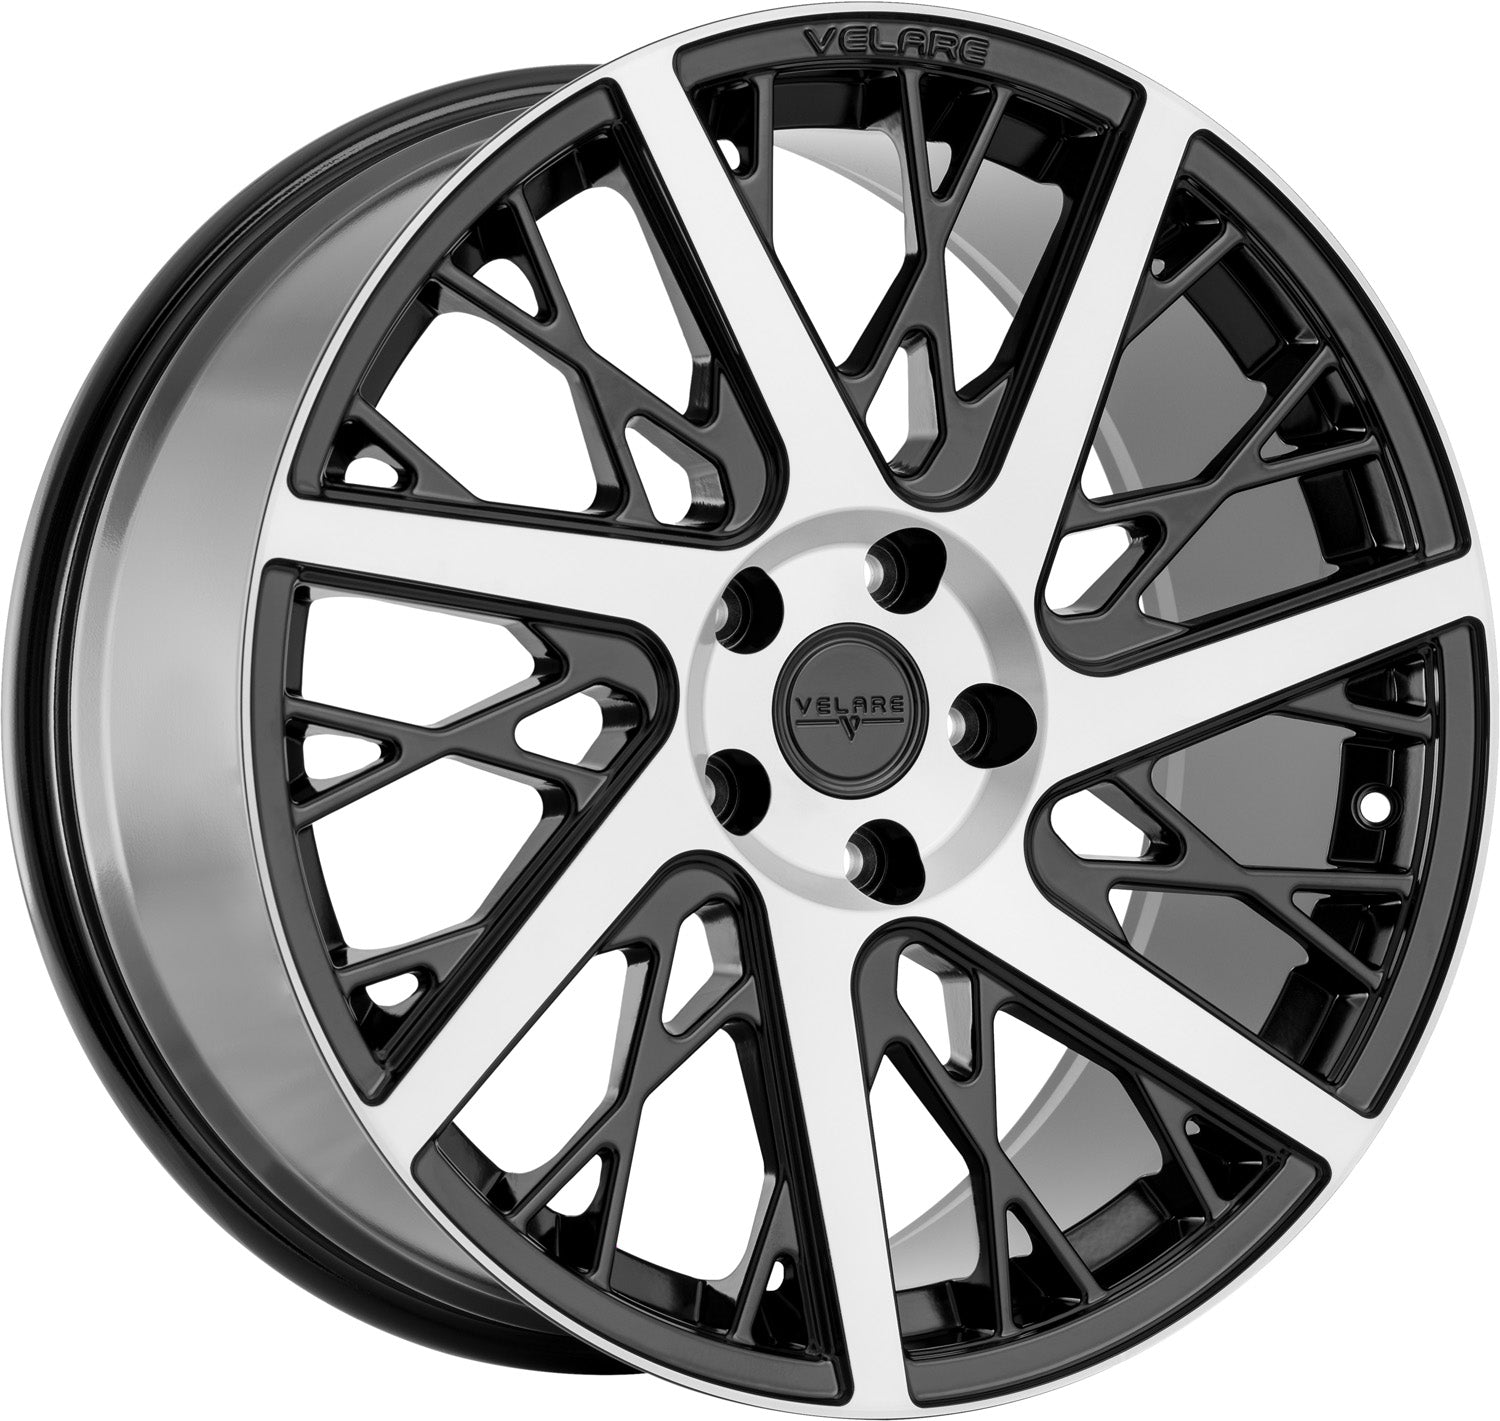 VLR05  Wheel and Tyre Package